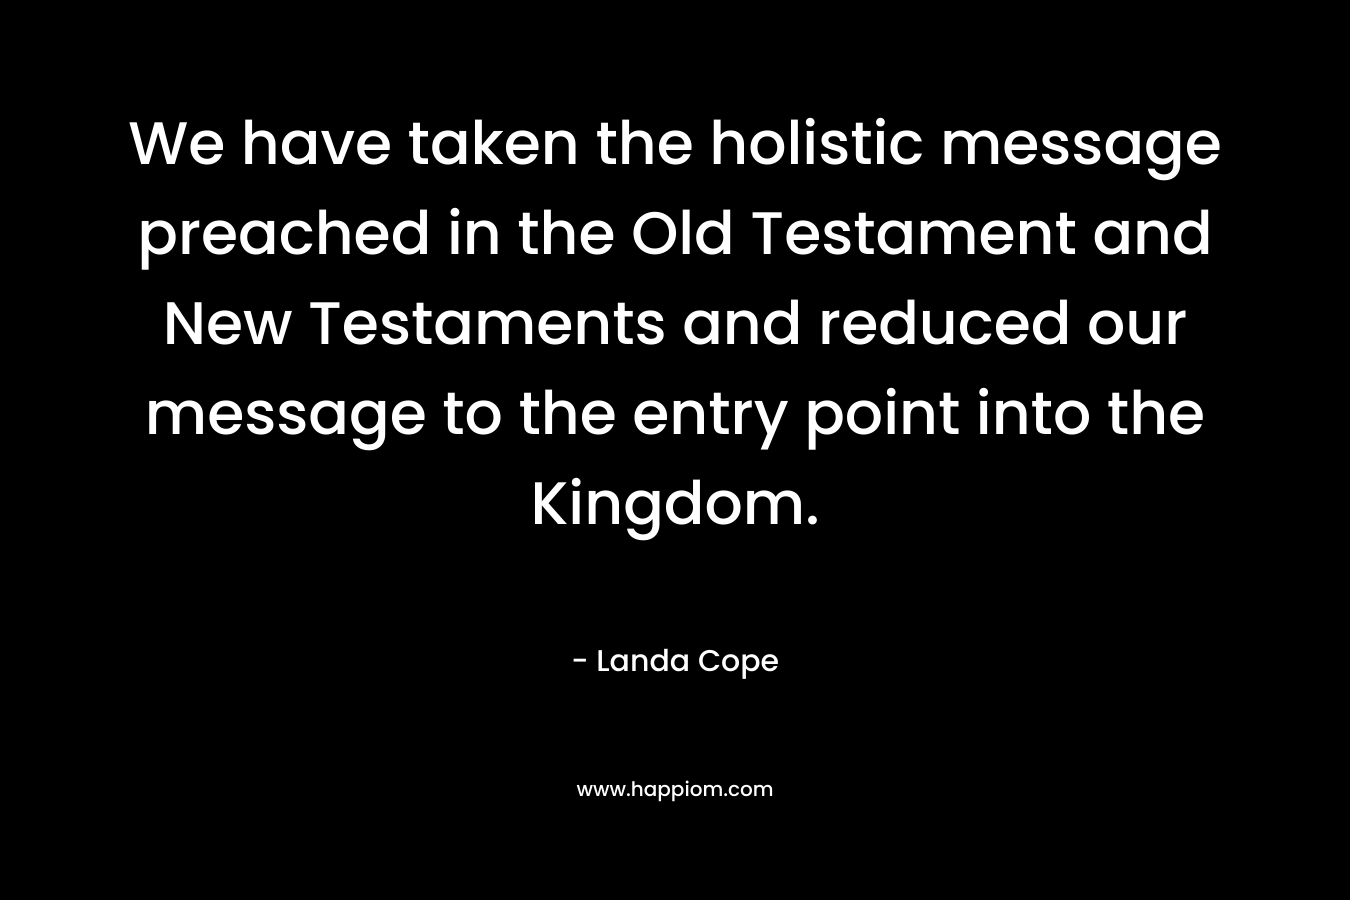 We have taken the holistic message preached in the Old Testament and New Testaments and reduced our message to the entry point into the Kingdom.